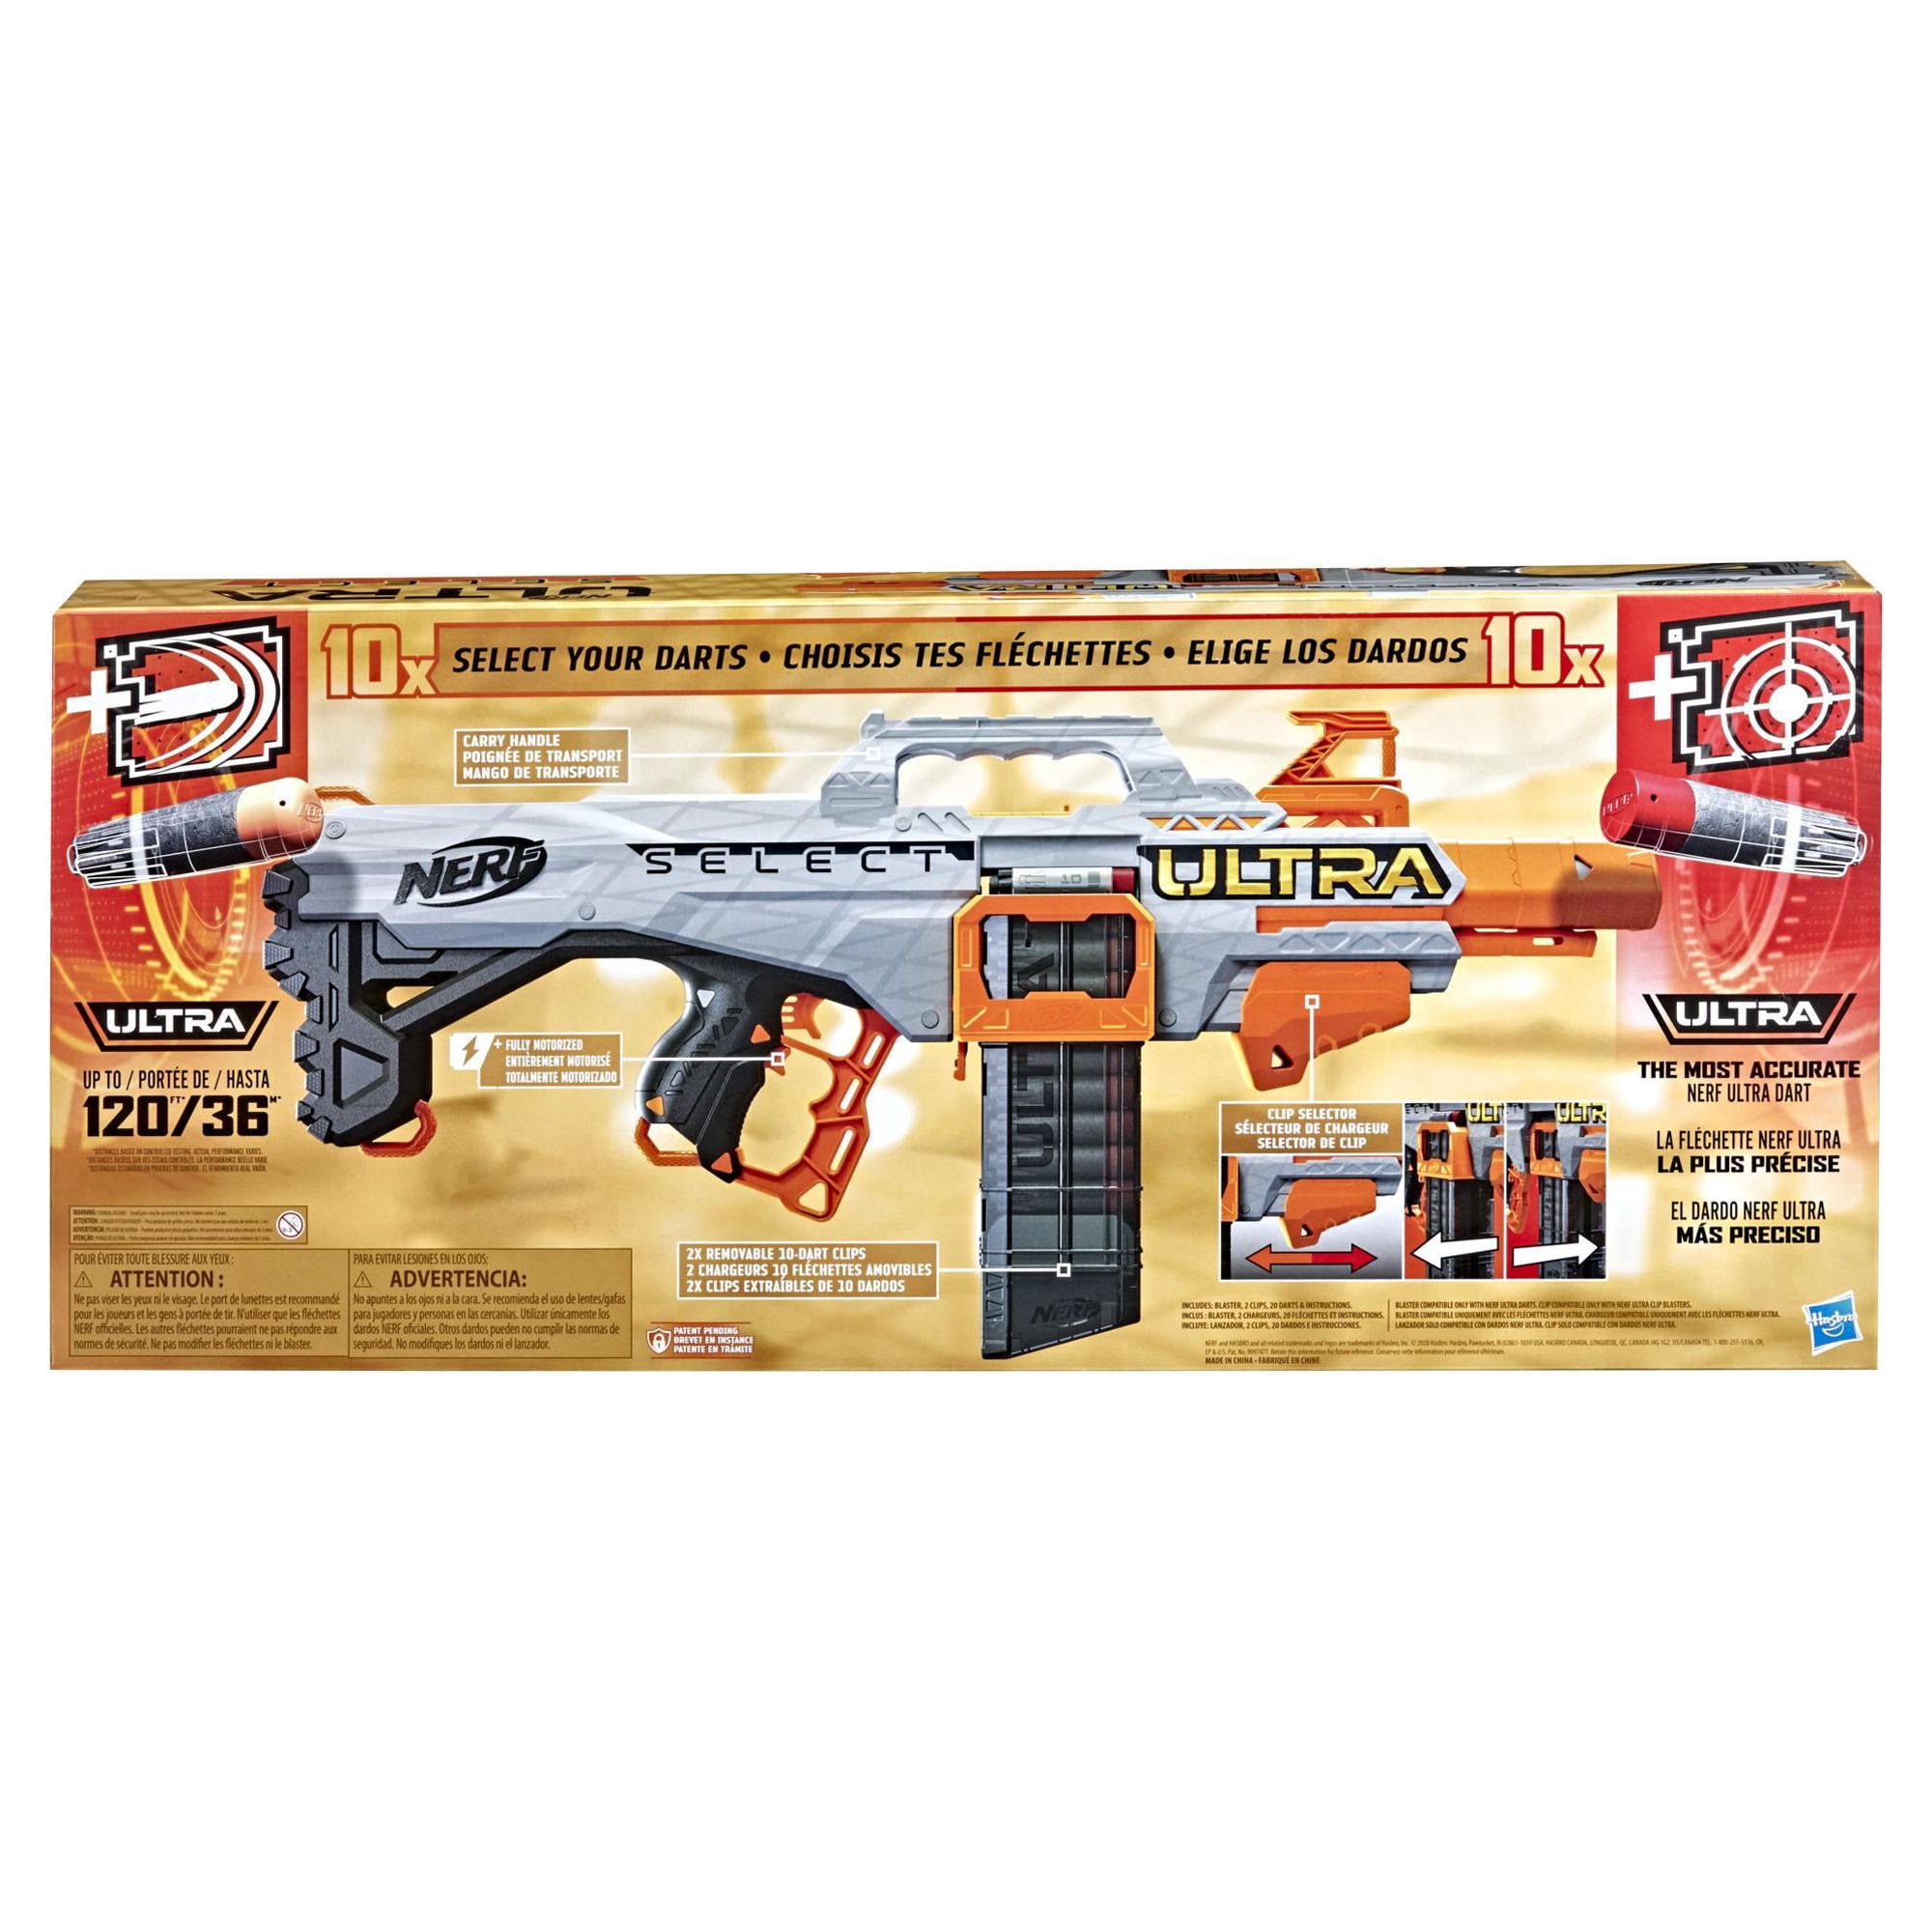 Nerf Ultra Select Fully Motorized Blaster, Fire 2 Ways, Includes Clips and Darts, Compatible Only with Nerf Ultra Darts - image 5 of 5